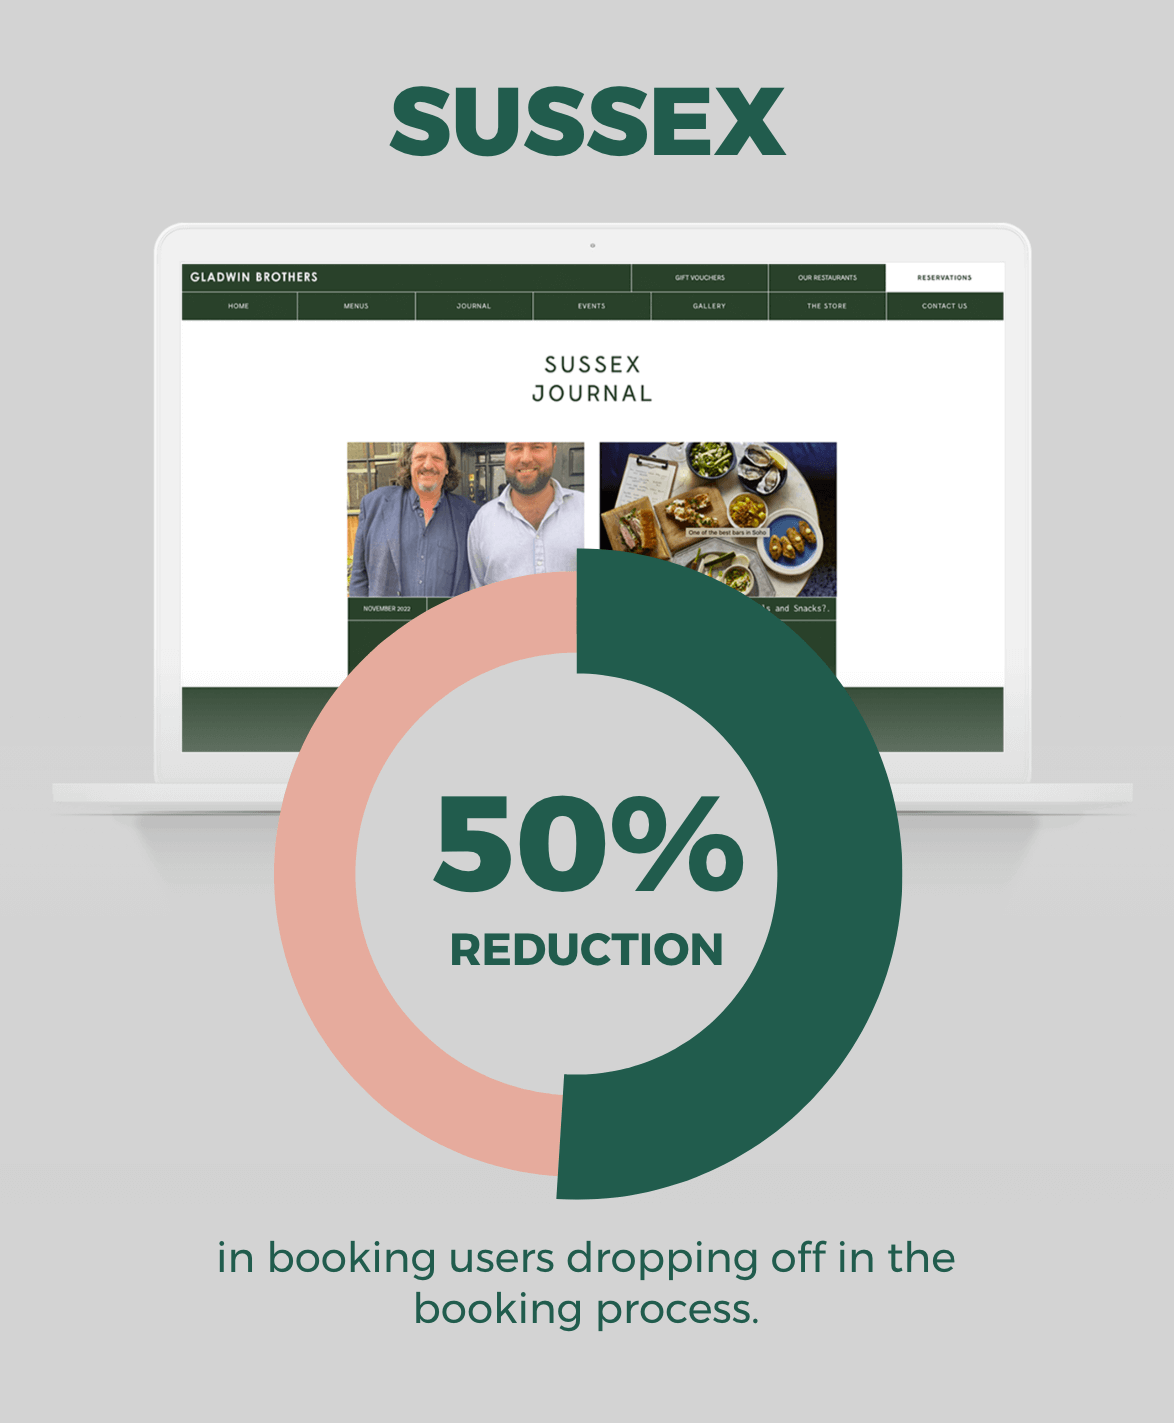 Statistics showing 50% reduction in users bookings dropping off thanks to their website redesign